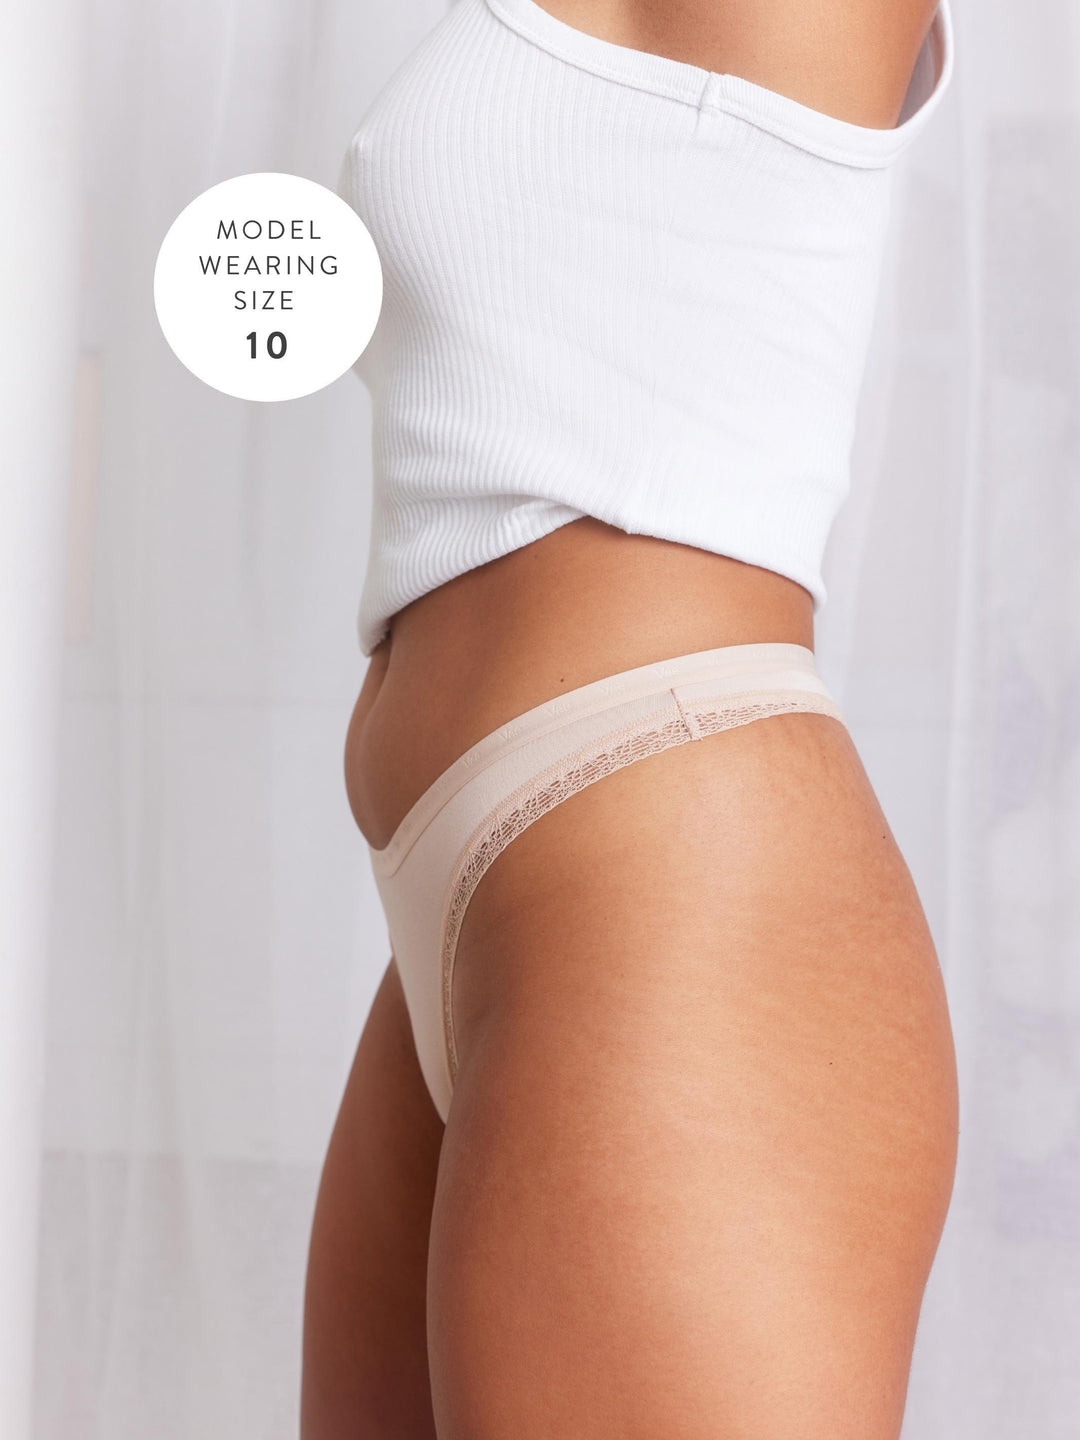 Organic Bamboo No Marks Panty for Women - Invisible Seamless Panties |  Seamless No line Panty without lines